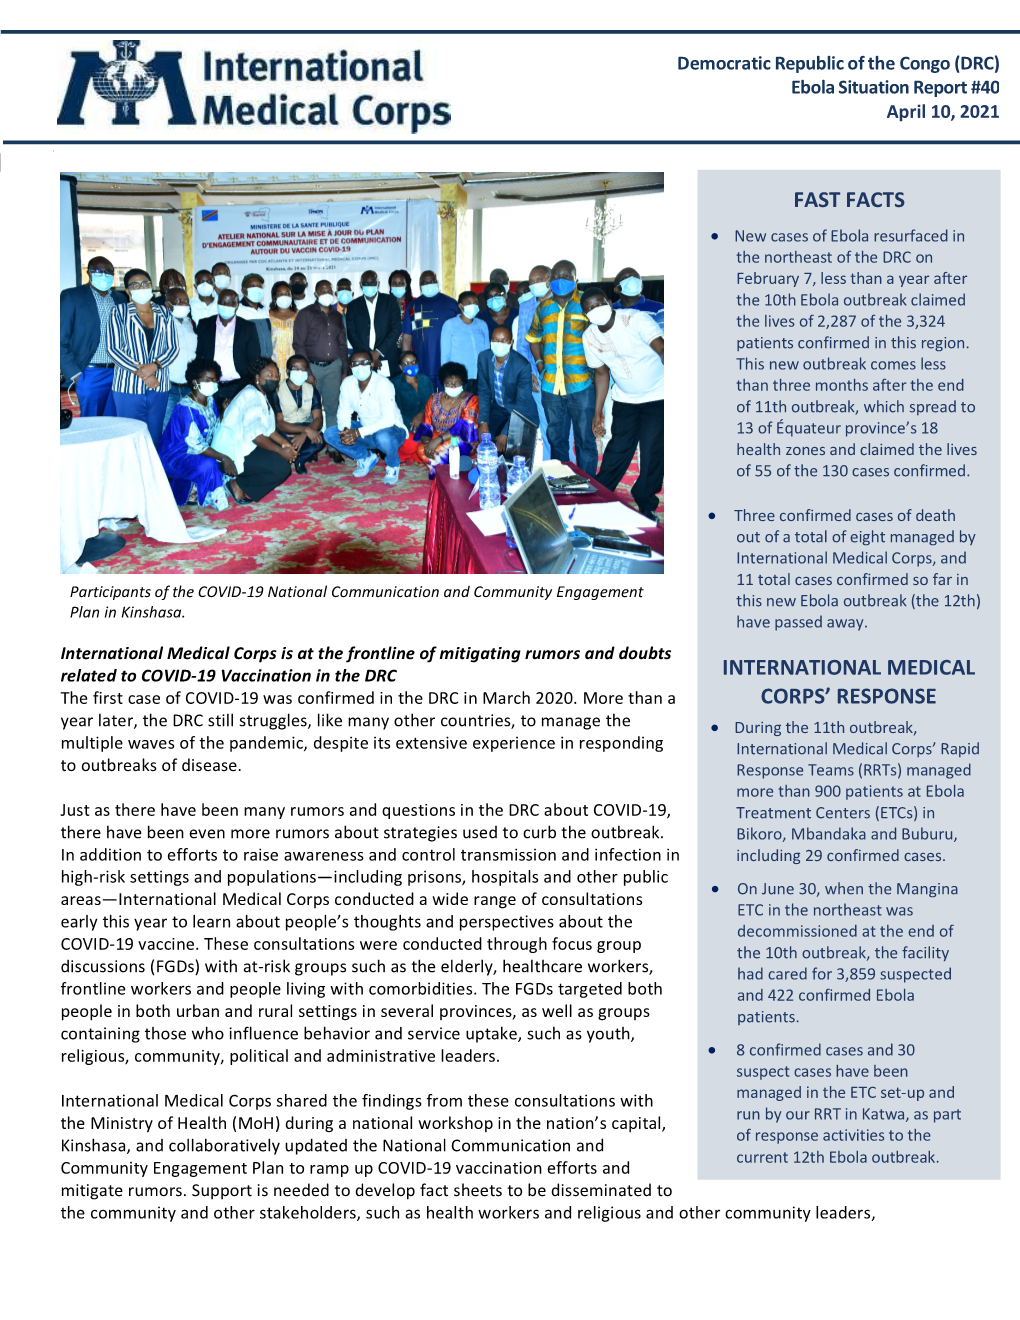 Fast Facts International Medical Corps' Response